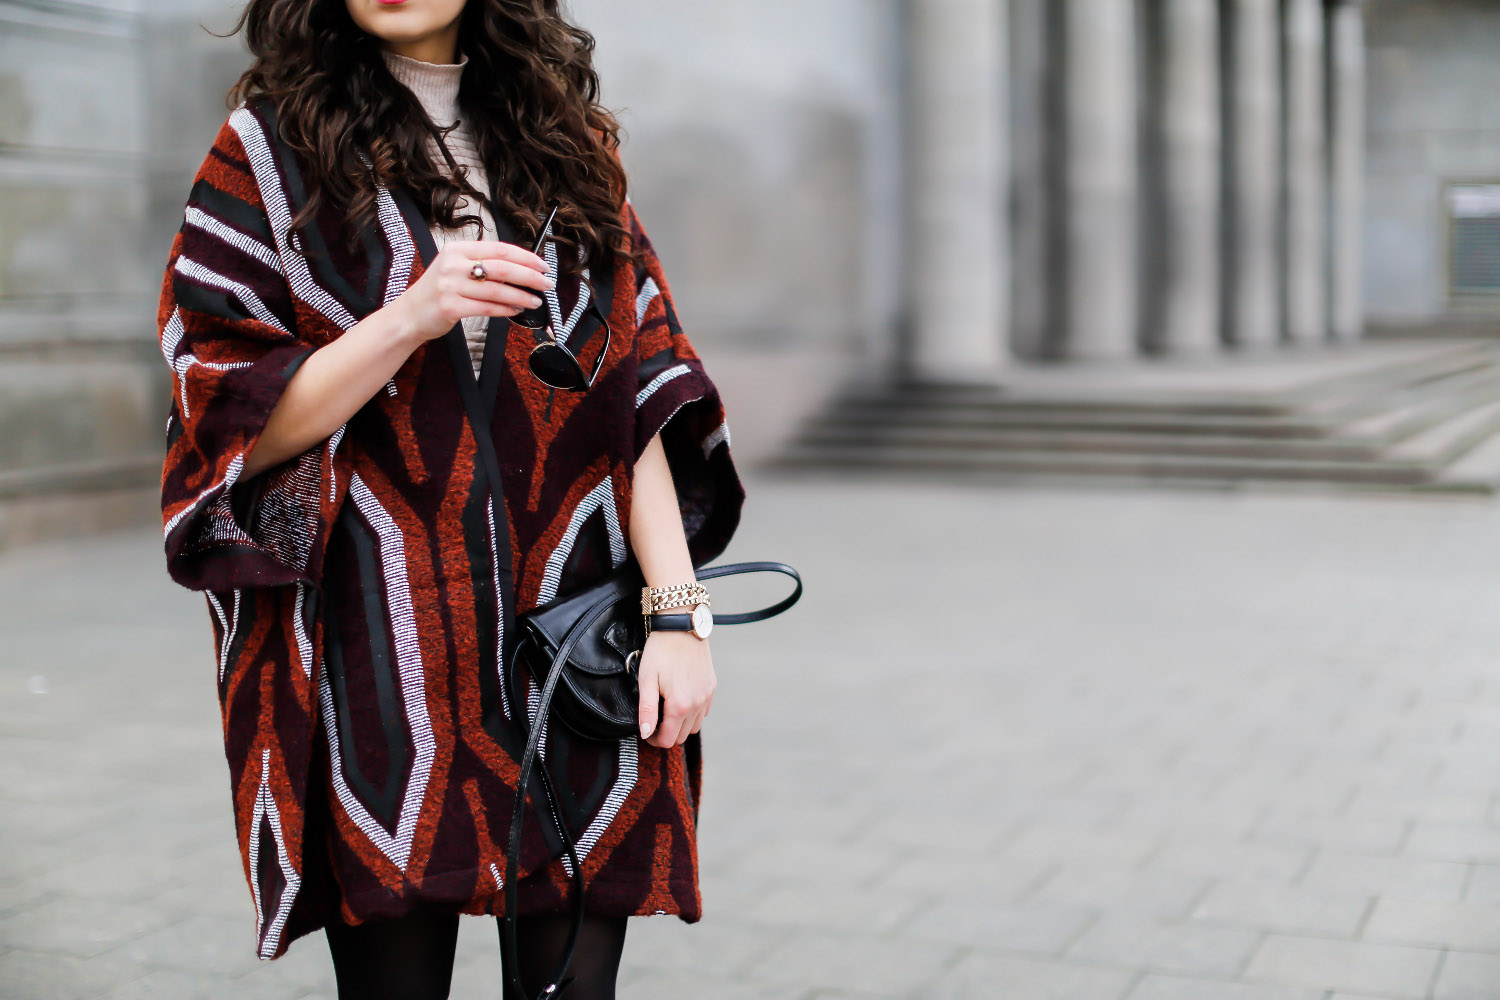 Mango Cape and Leather Shorts streetstyle winterspring frühlings outfit look aztec poncho fashionblog wie poncho kombinieren how to cape samieze